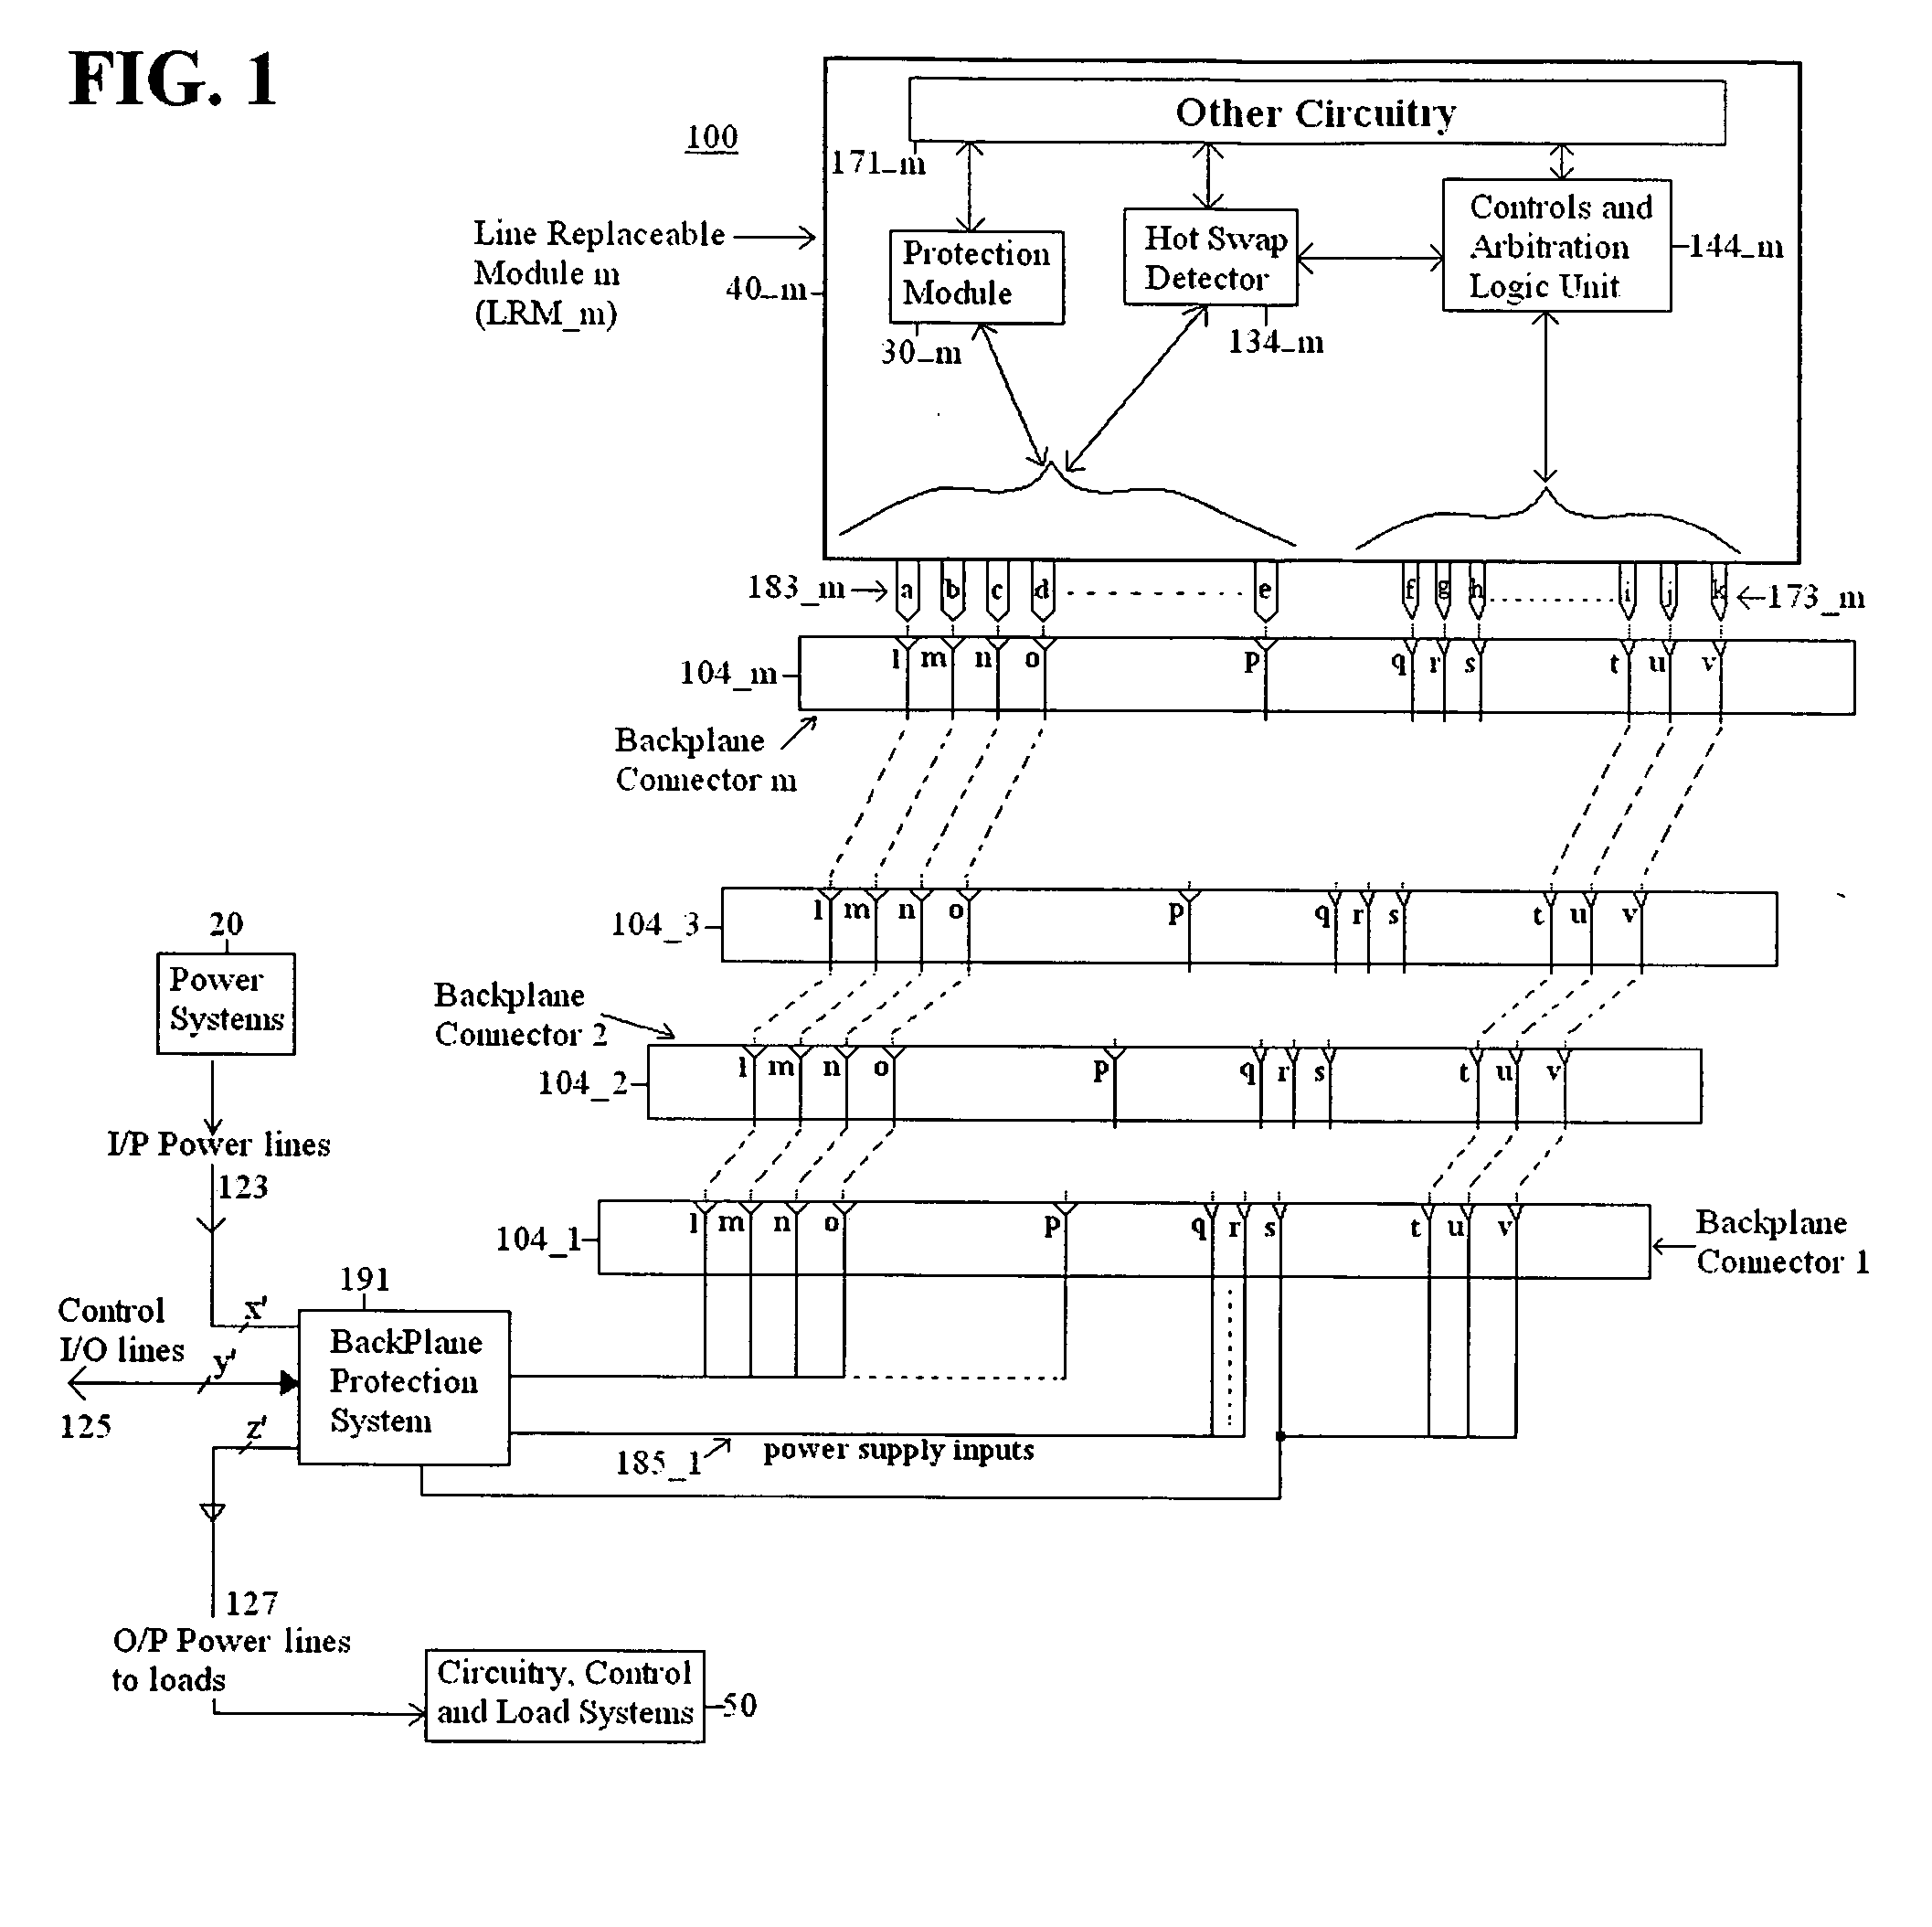 Method and apparatus for hot swap of line replaceable modules for AC and DC electric power systems